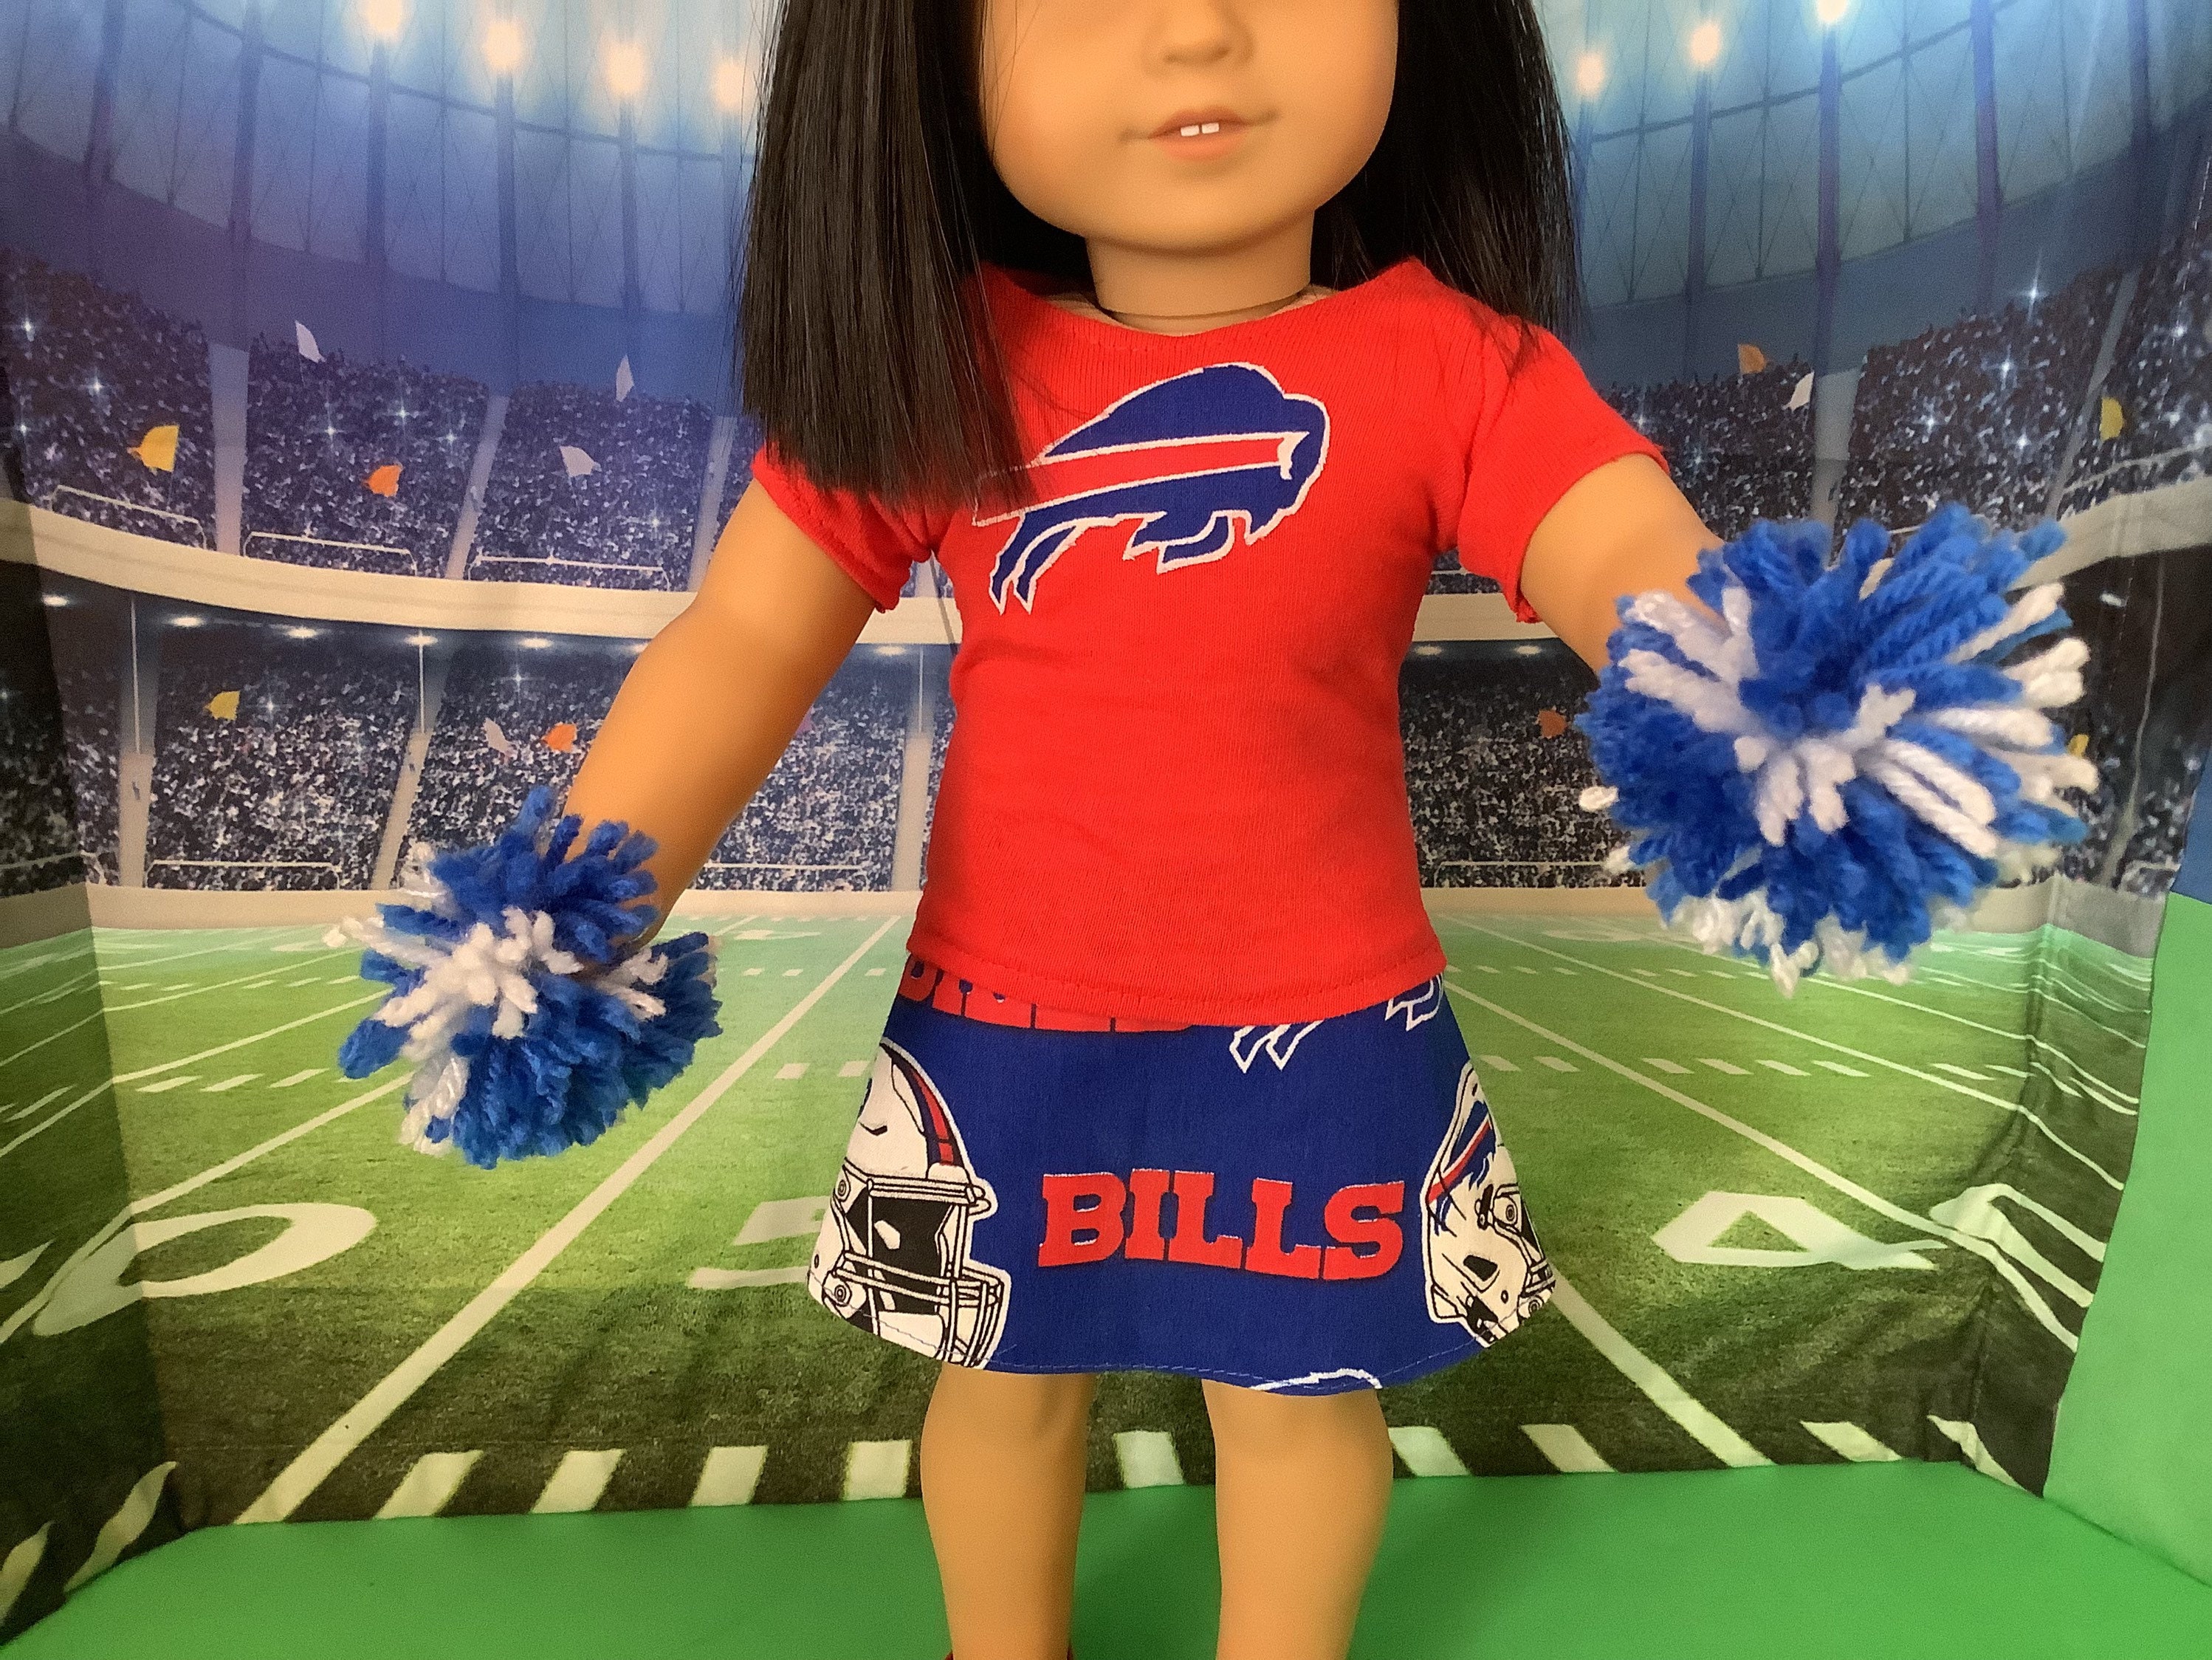 Buffalo BILLS Outfits 18in Doll Clothes, Handmade, Fits All 18 Inch Dolls 